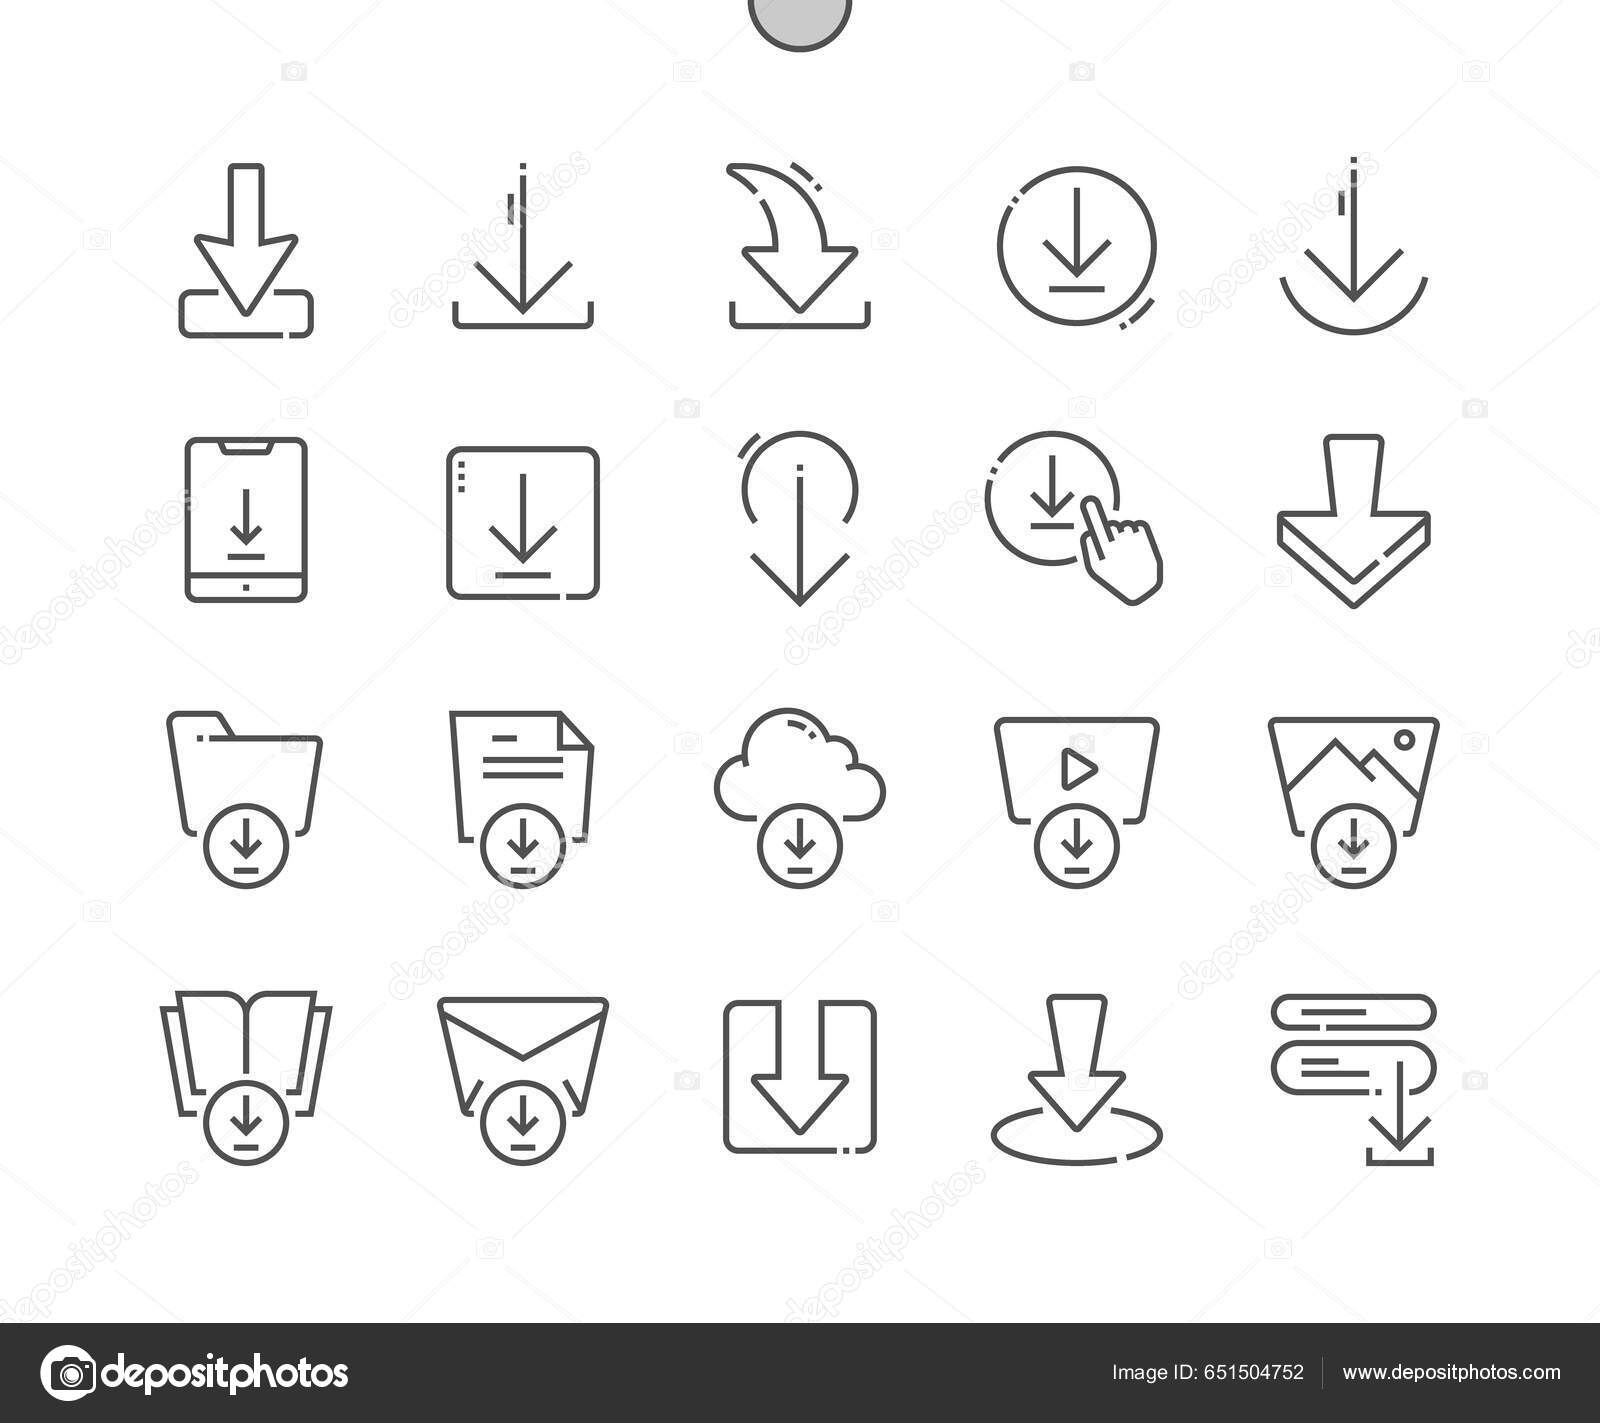 Clicker - Download free icons